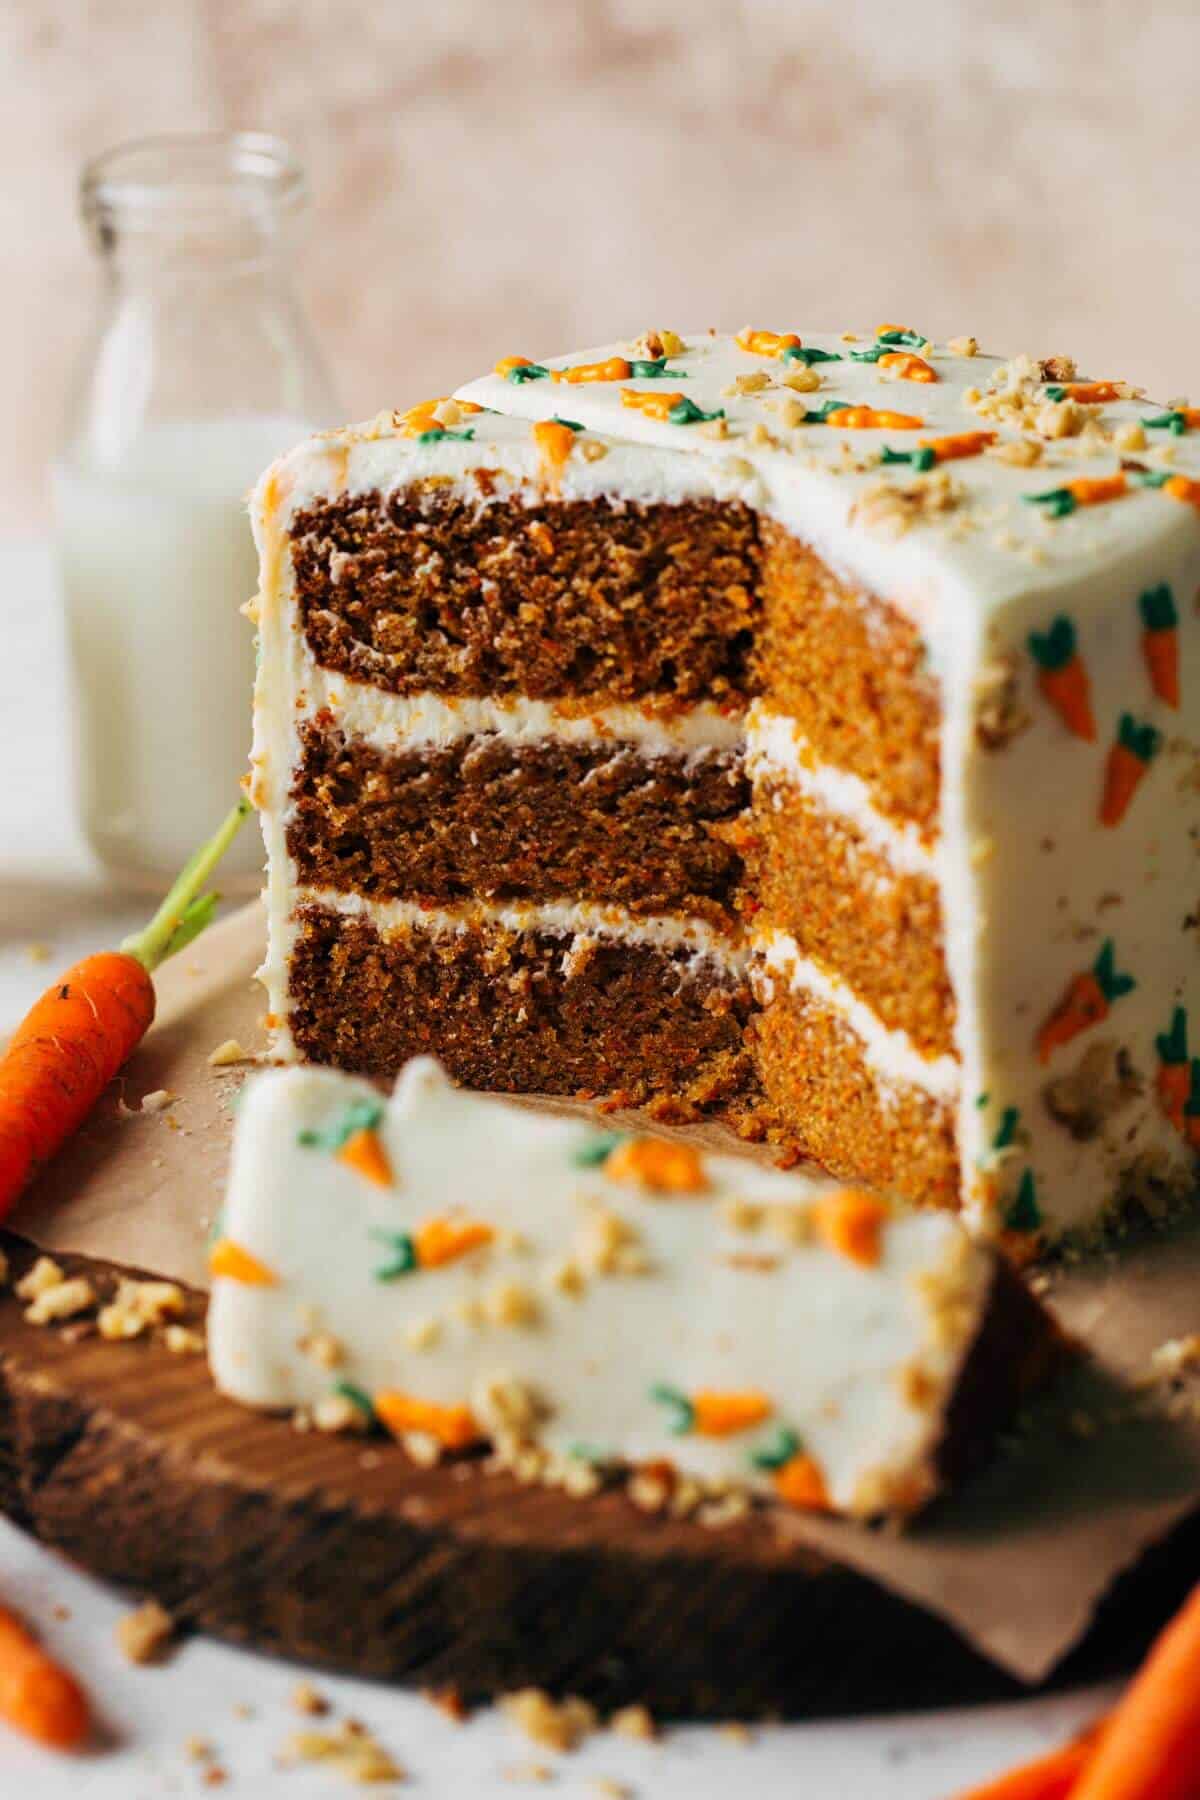 Carrot cake is typically made with a combination of warm spices such as cin...